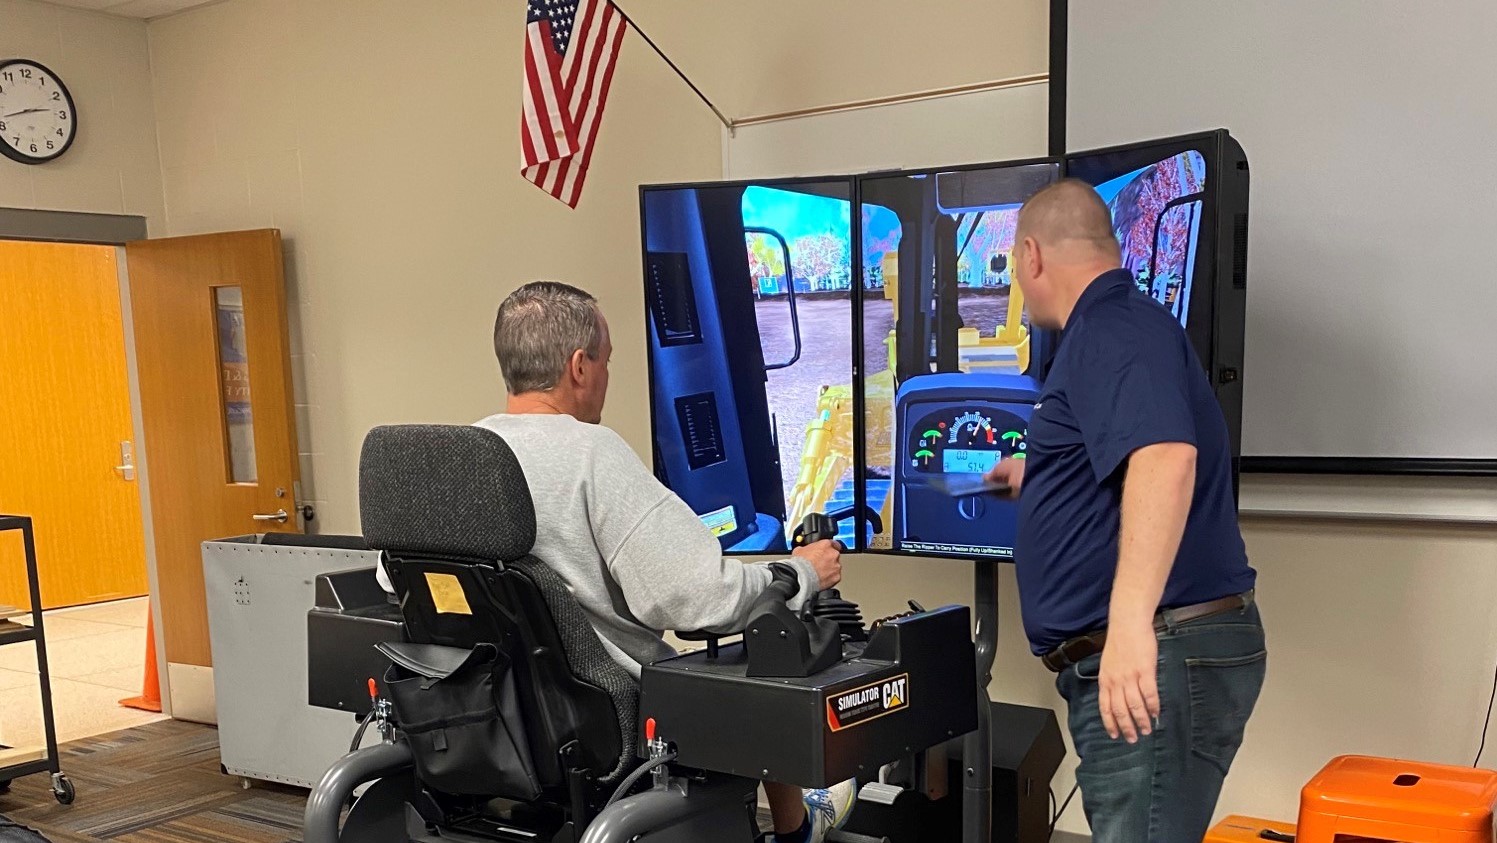 Virtual reality instructor shows student how to control the virtual excavator